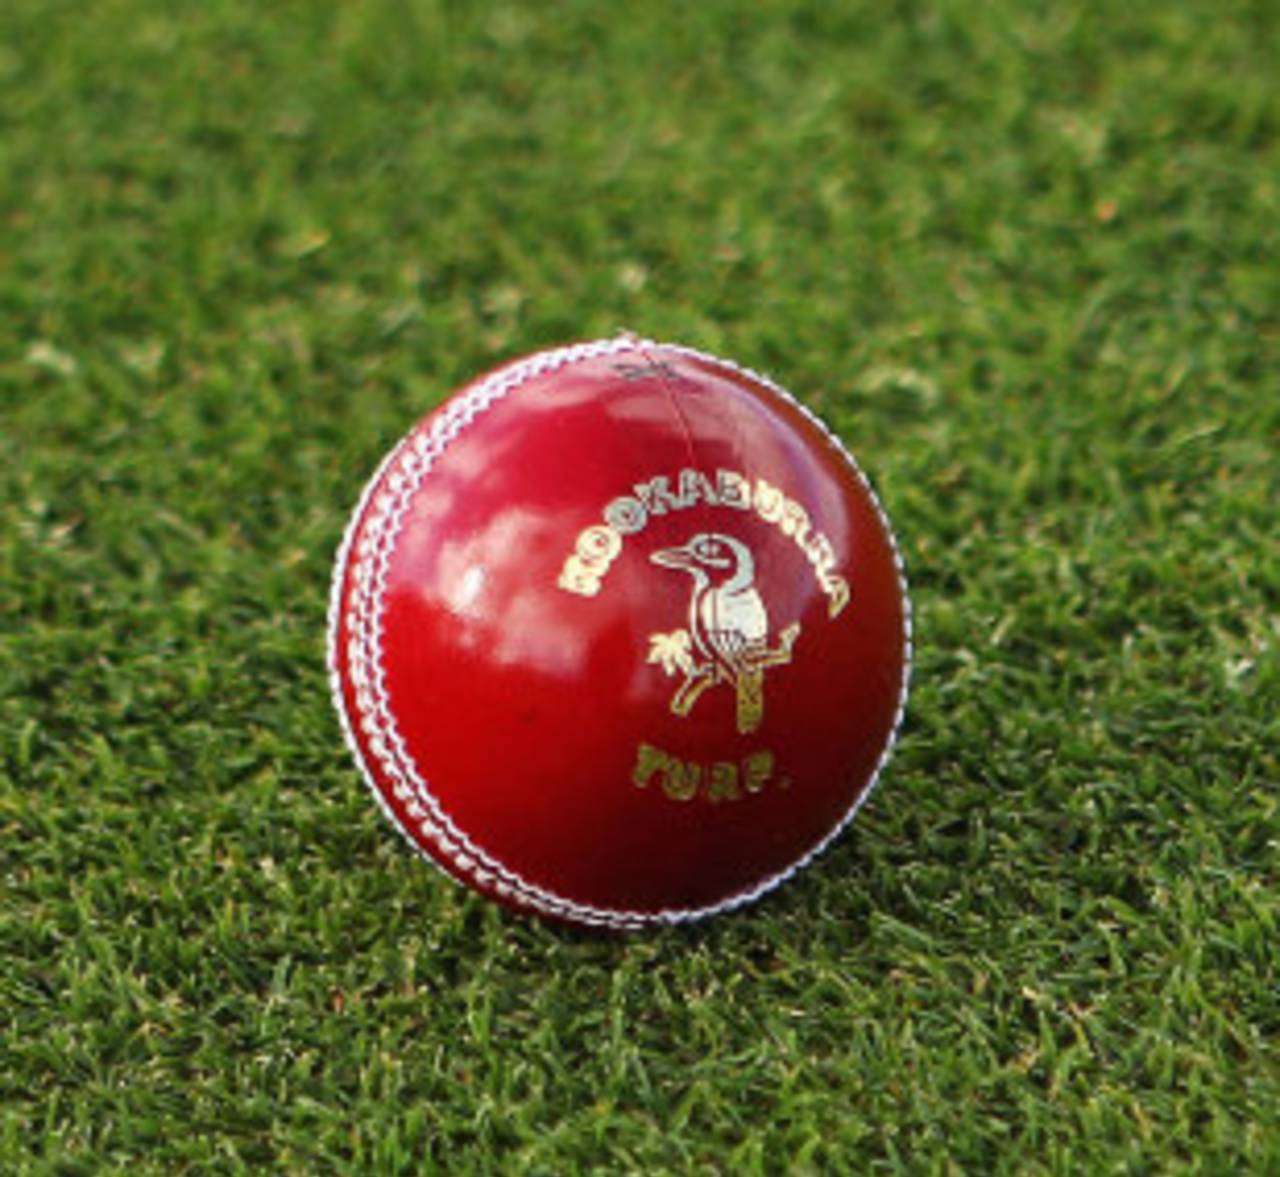 The Kookaburra ball will be used from the fifth round of the President's Trophy&nbsp;&nbsp;&bull;&nbsp;&nbsp;Getty Images